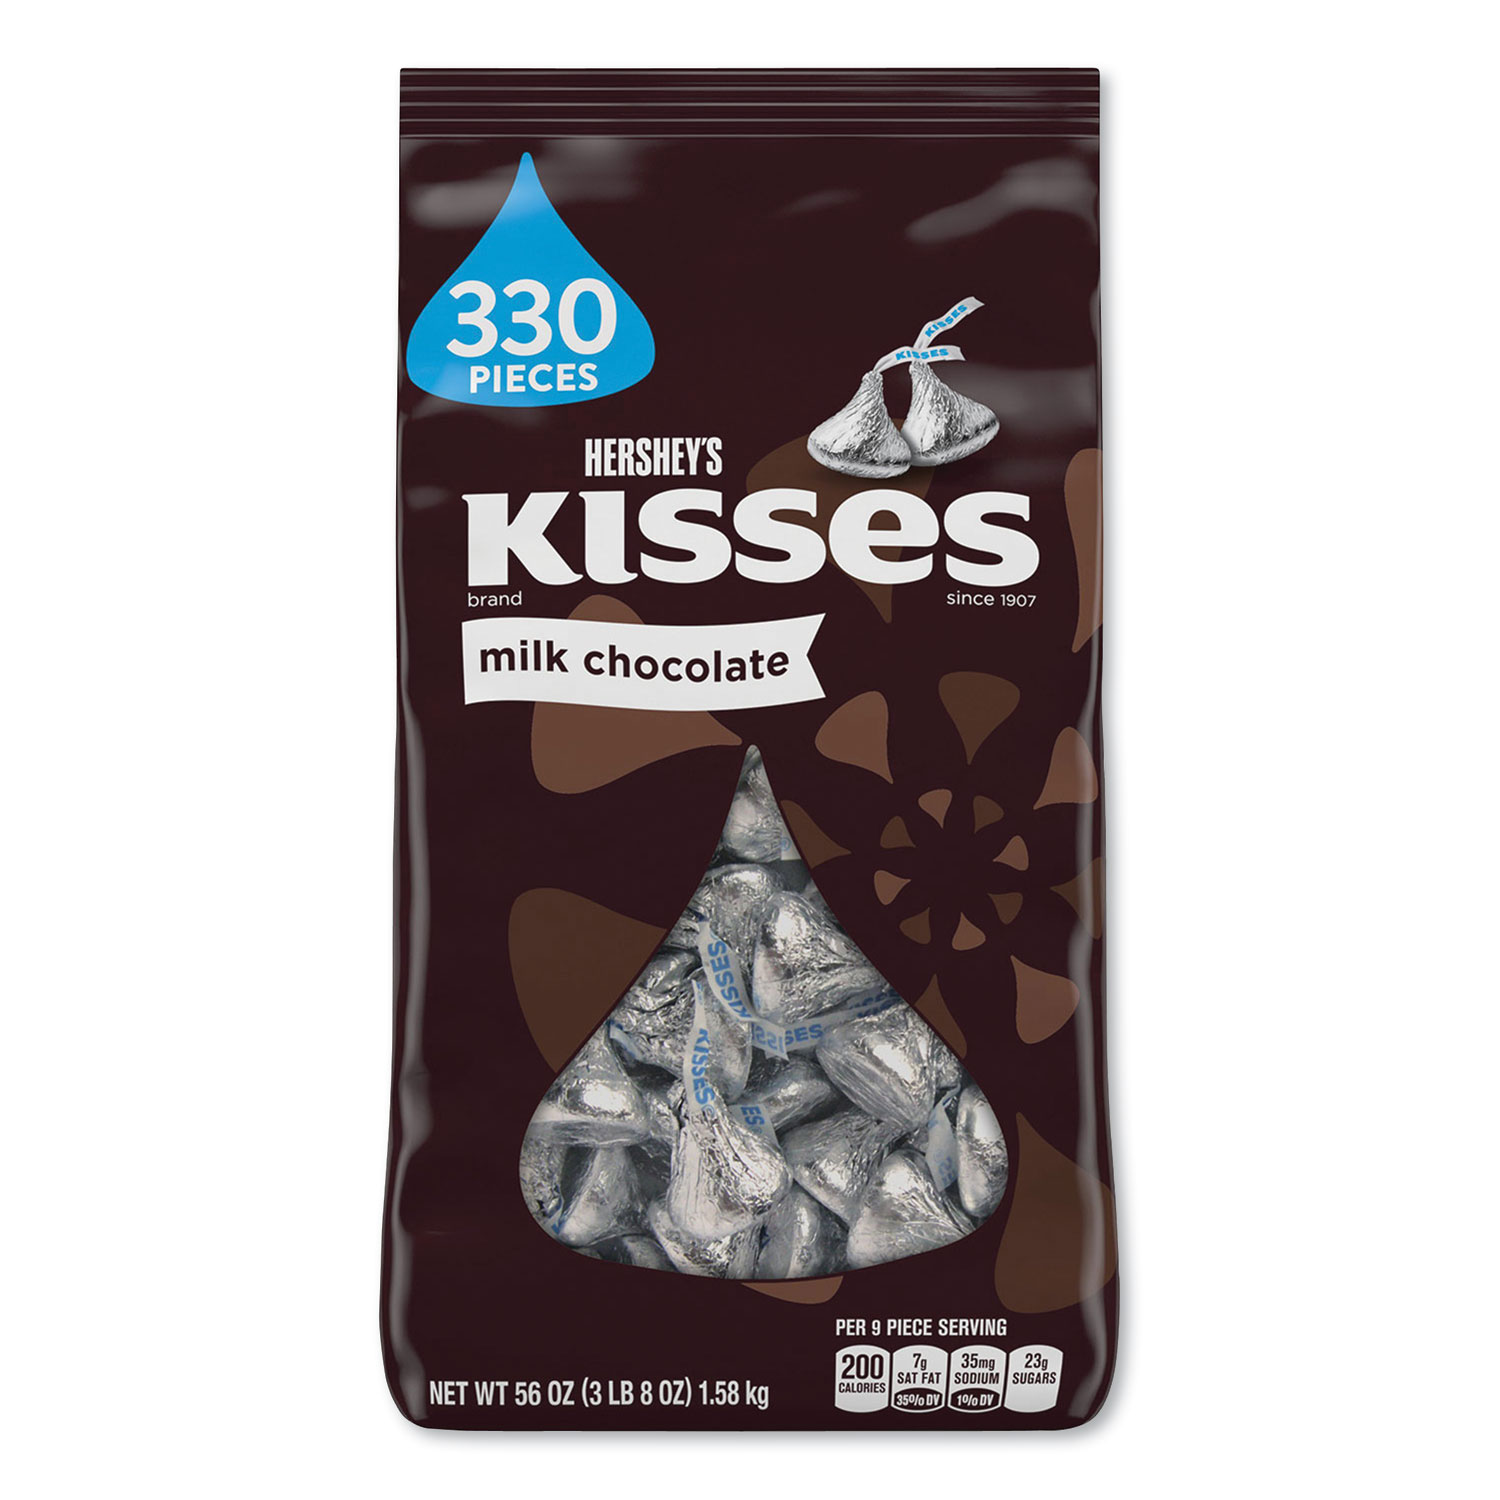  Hershey's HEC12295 KISSES, Milk Chocolate, Silver Wrappers, 56 oz Bag (HRS183795) 